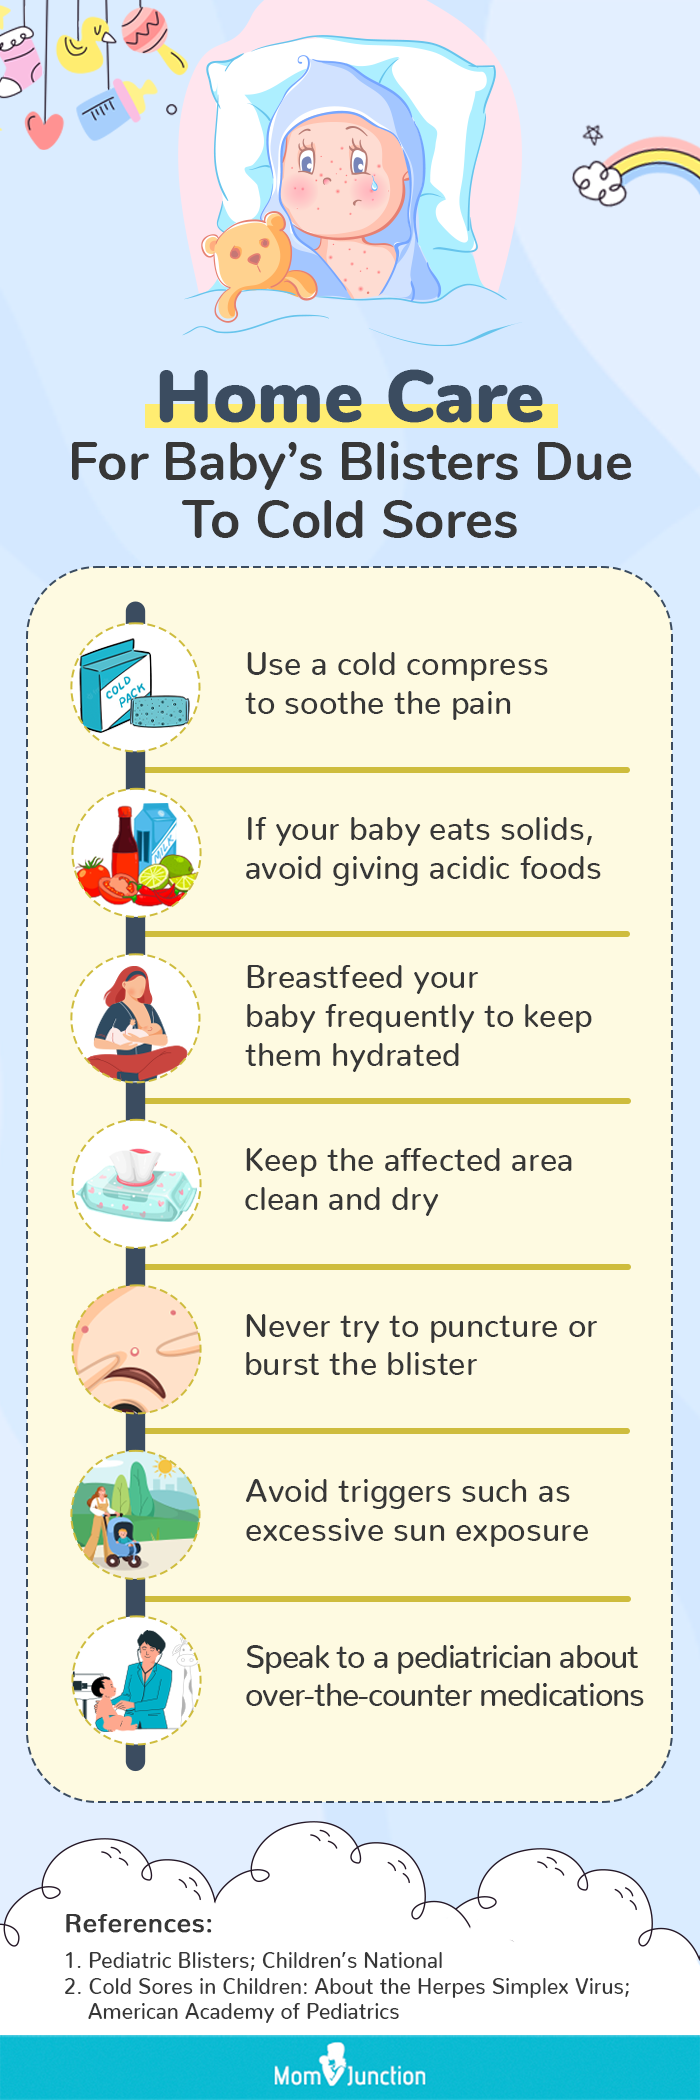 home care for baby’s blisters due to cold sores (infographic)